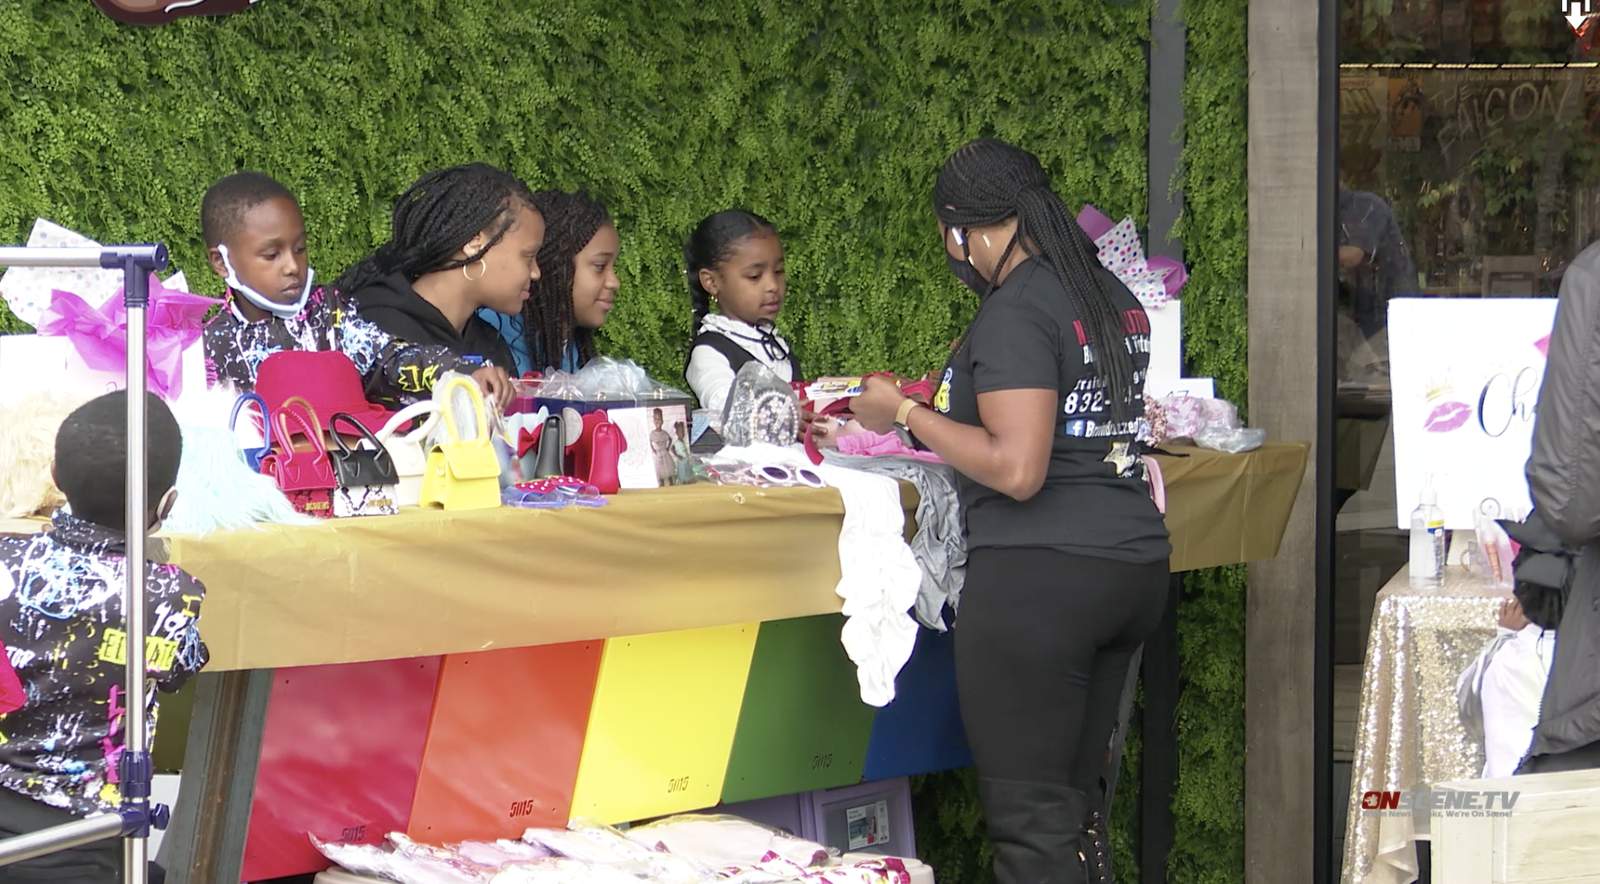 15 kid entrepreneurs showcase products at pop-up shopping event in Houston